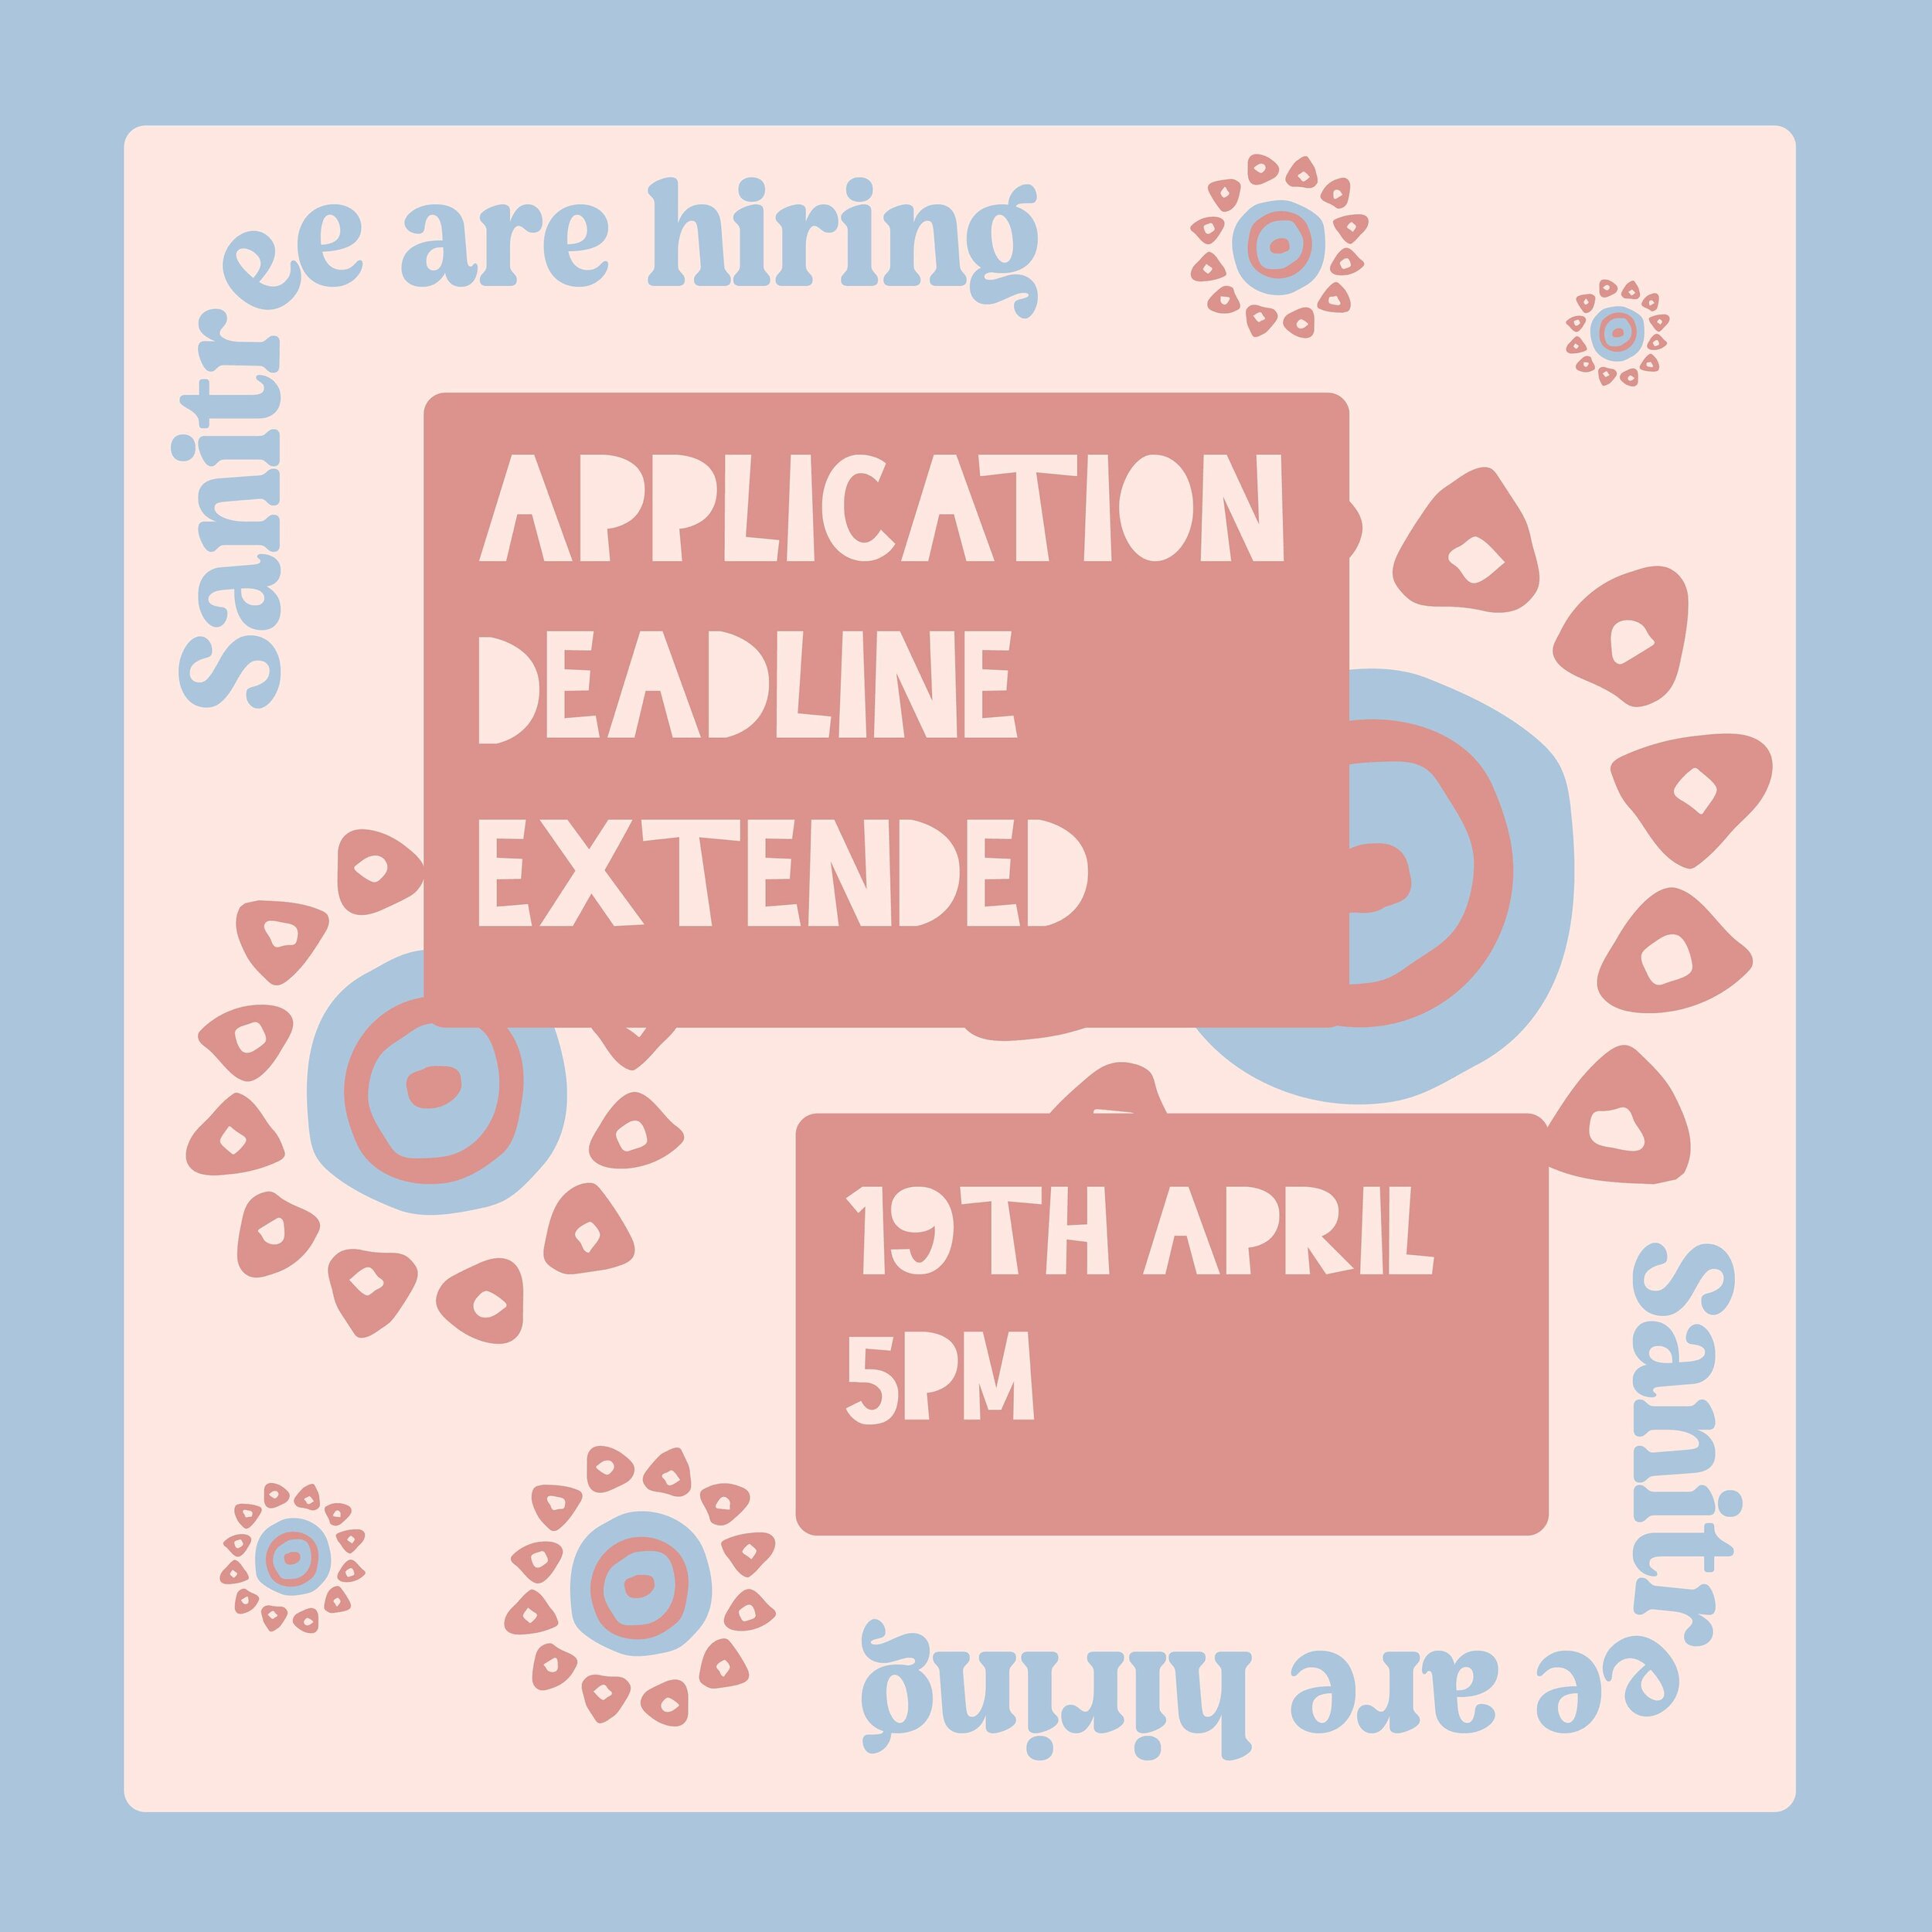 Want to get involved in our team &hellip;?

🌟We are extending the application deadline to the 19th April, at 5pm !! 🌟

We have a wide range of amazing roles within our Edinburgh team, where you can put your skills to positive use as one of our valu